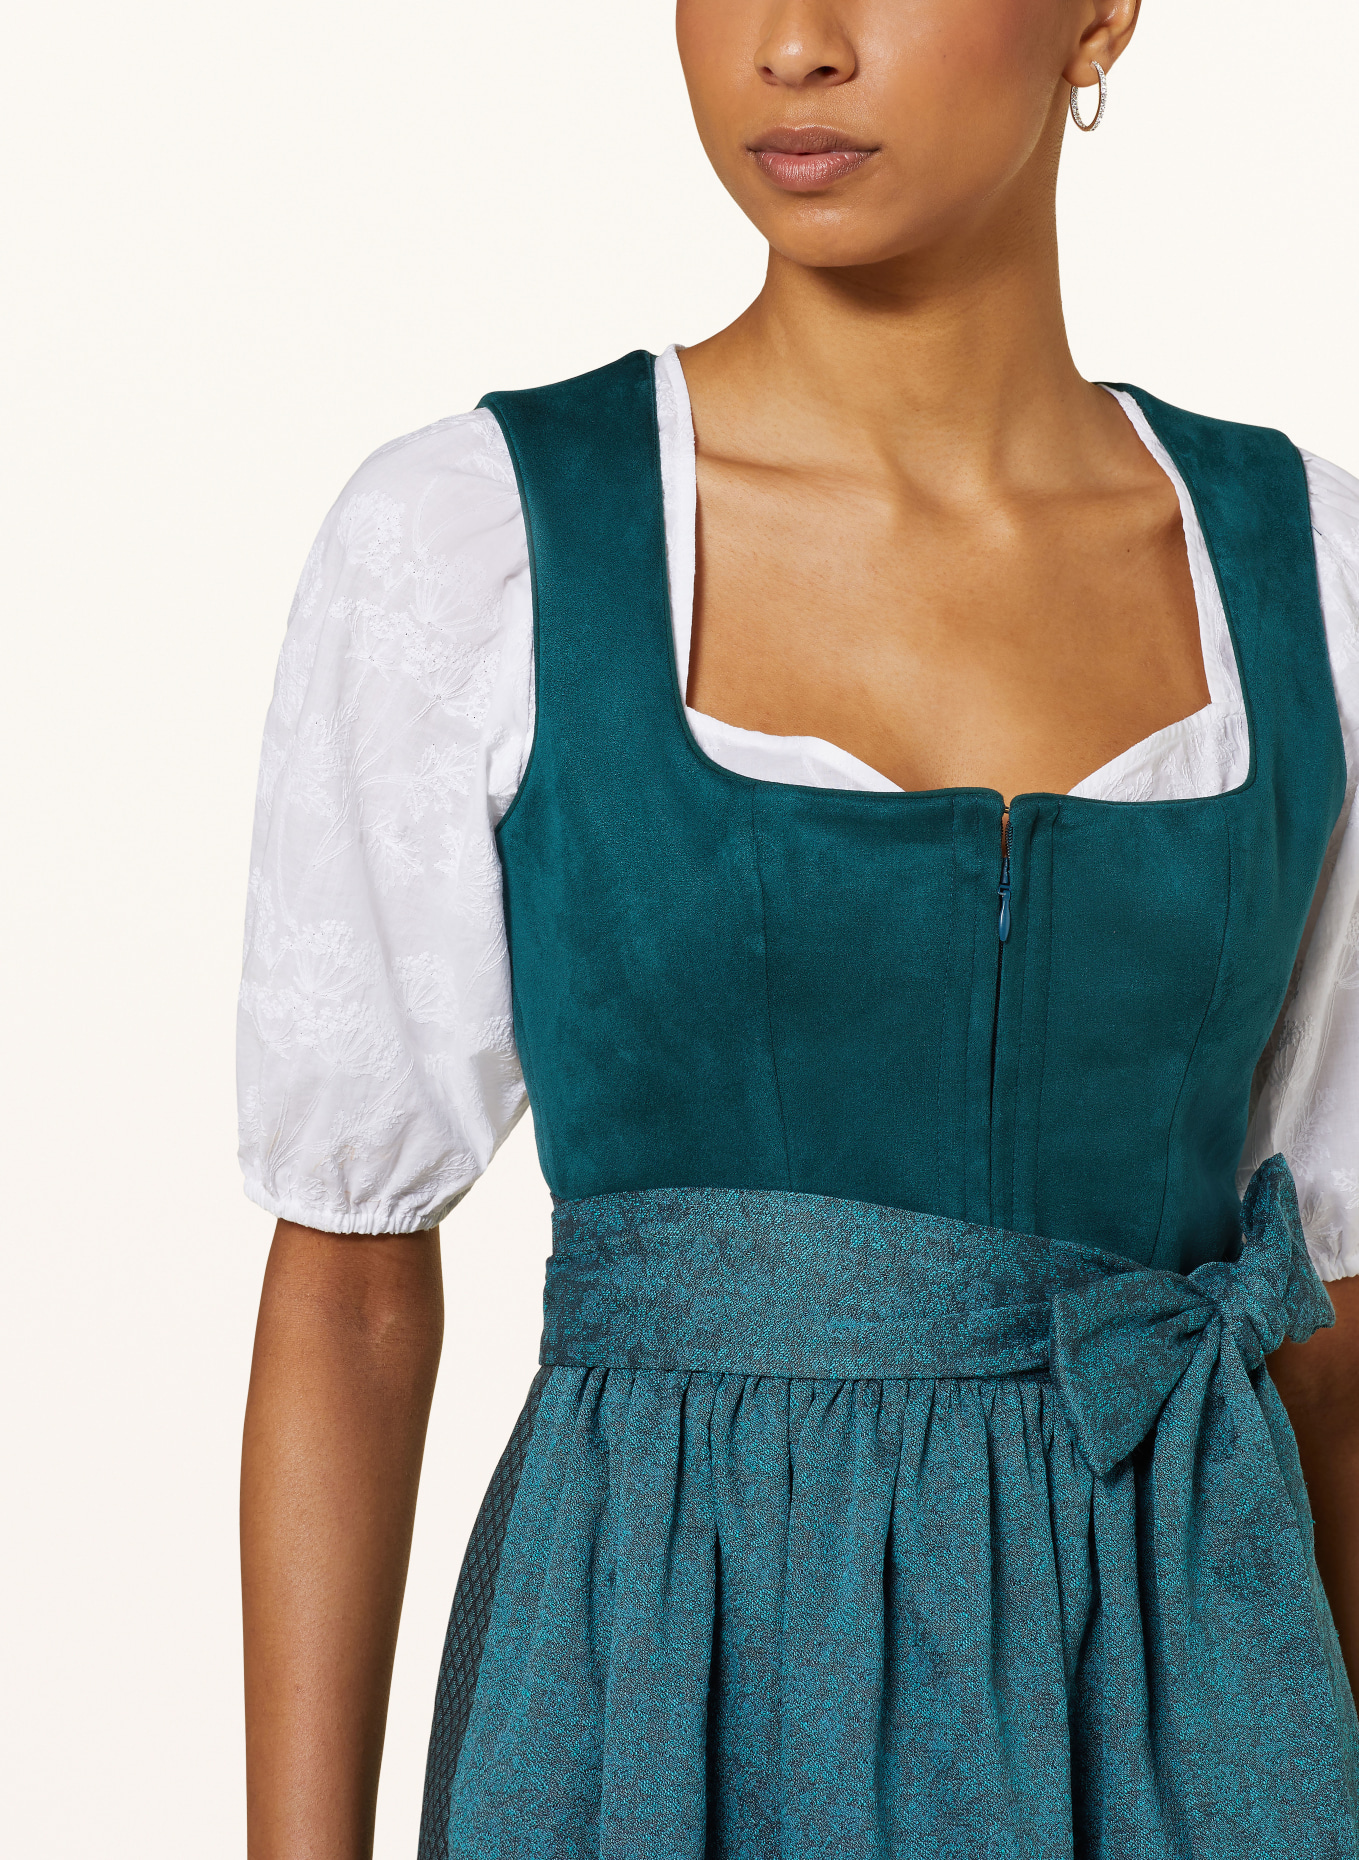 LIMBERRY Dirndl, Color: TEAL/ TURQUOISE/ DARK GRAY (Image 4)